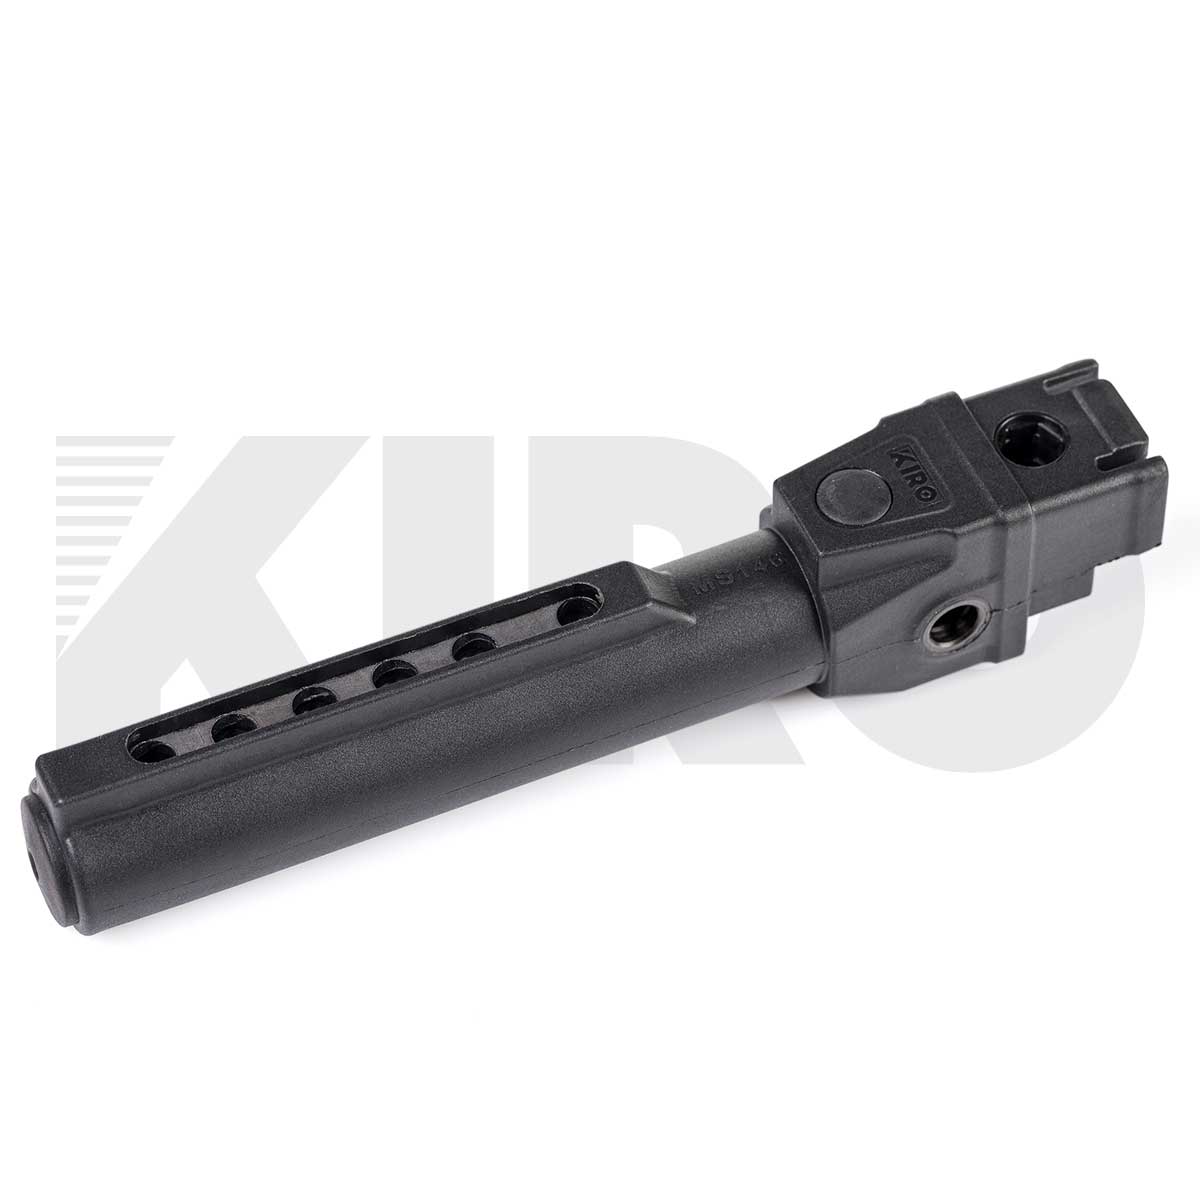 KIRO AT47 - Fixed Adapter Tube for AK-47, AKM and AK-74 Variants (Mil-Spec)